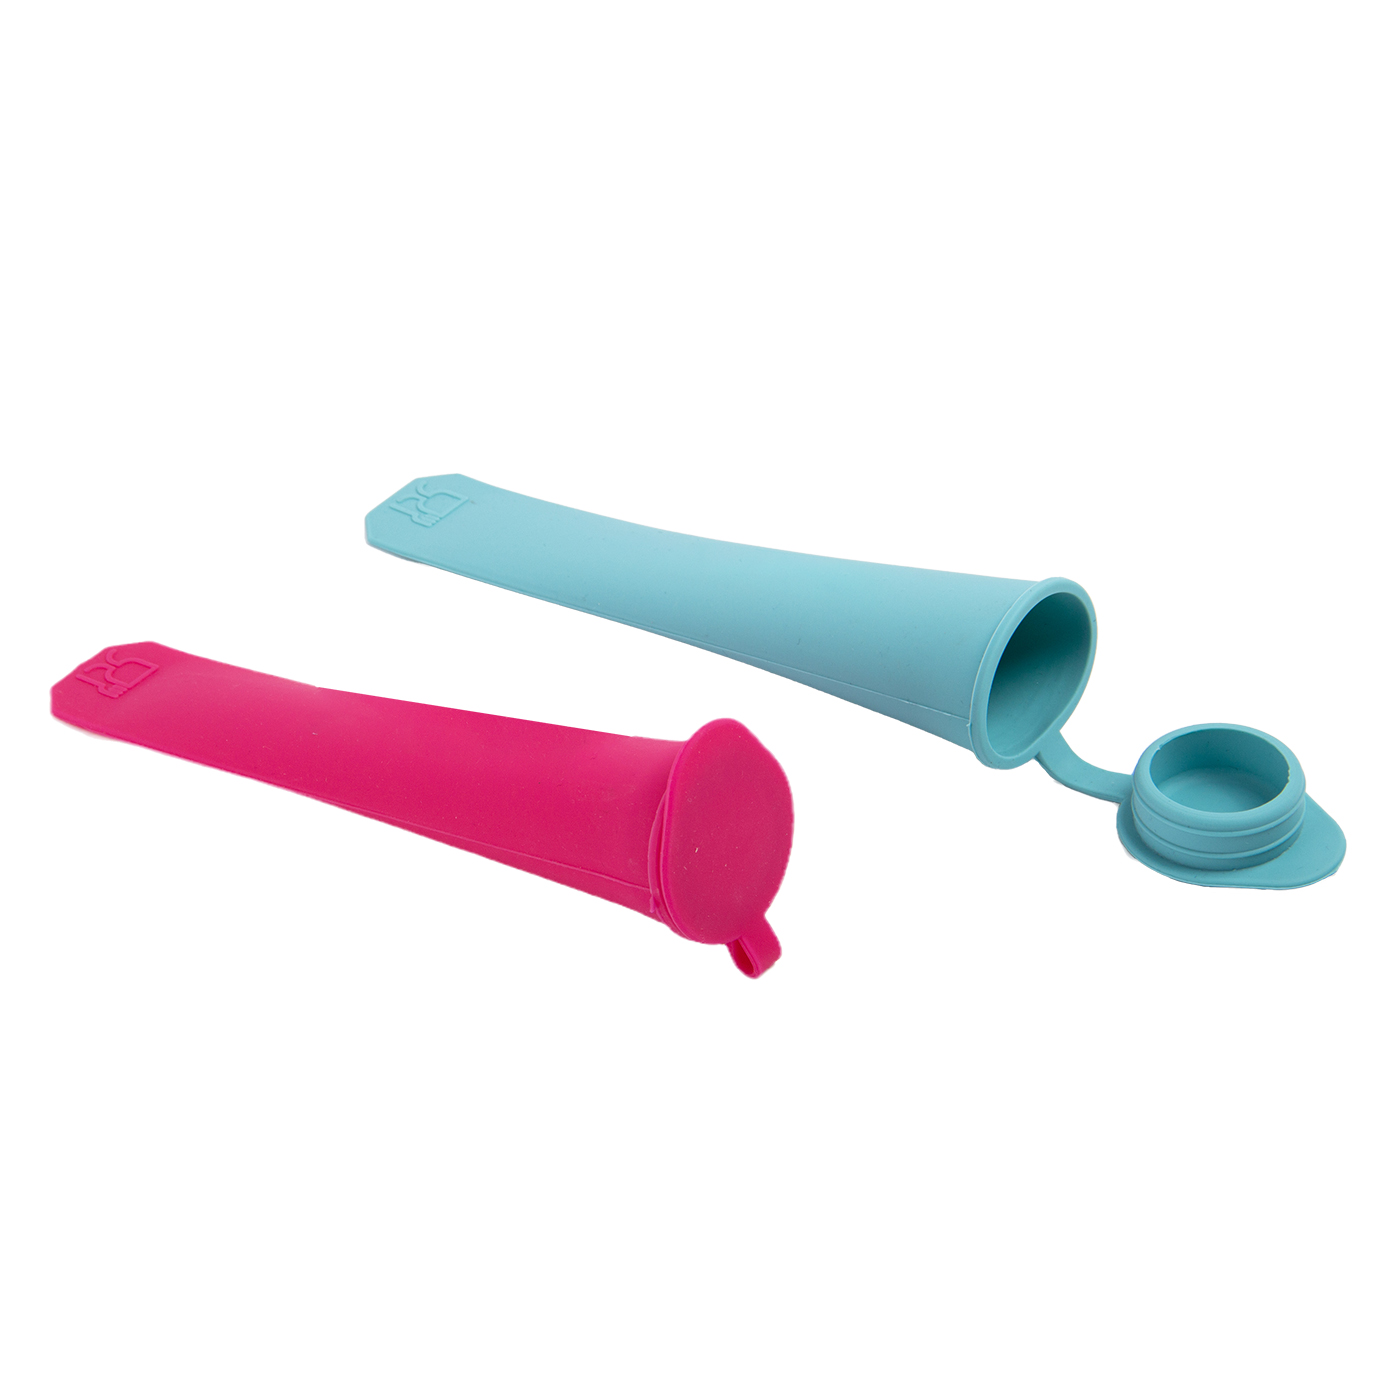 Silicone Handheld Popsicle Mold With Lid3